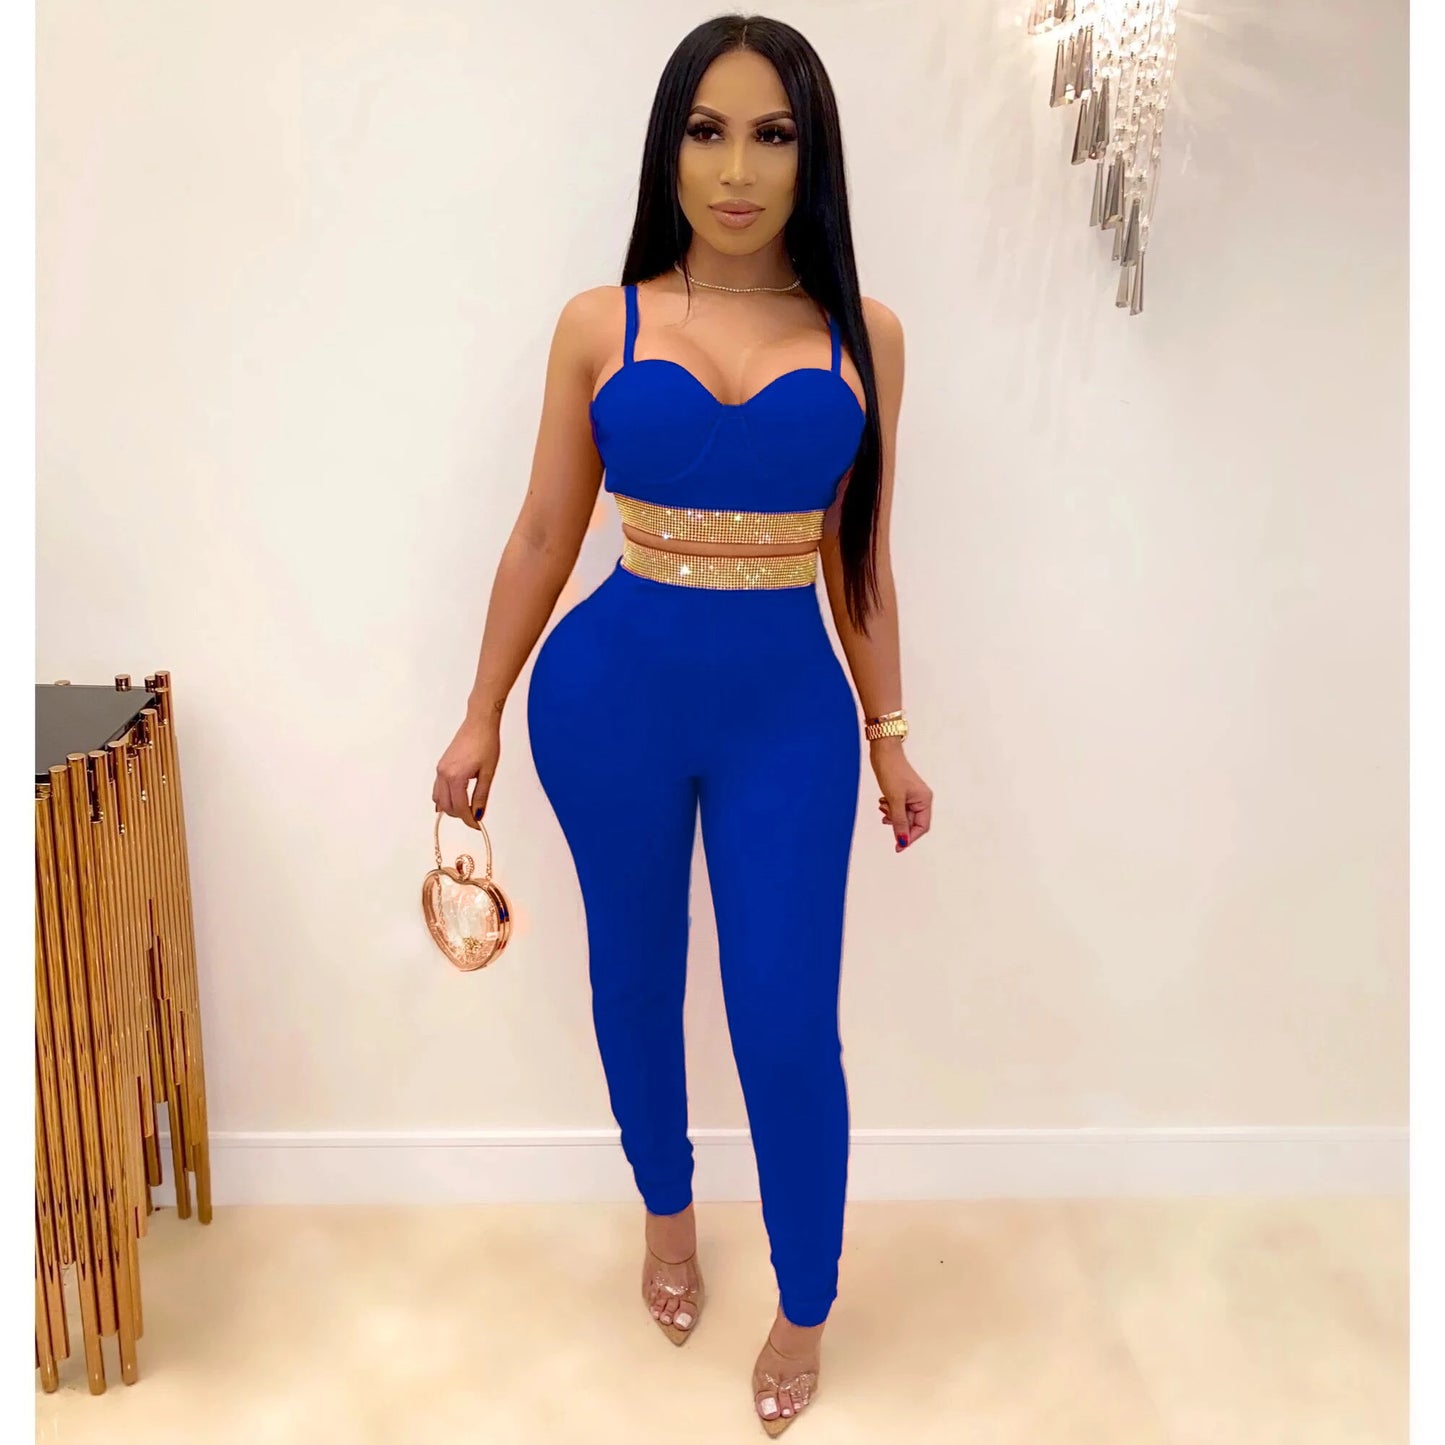 Bodycon Fashion Set 2 Pieces Strap Crystal Rhinestone Chain Bustiers Leggings Sexy Luxury Bandage Dress Knitted Party Set